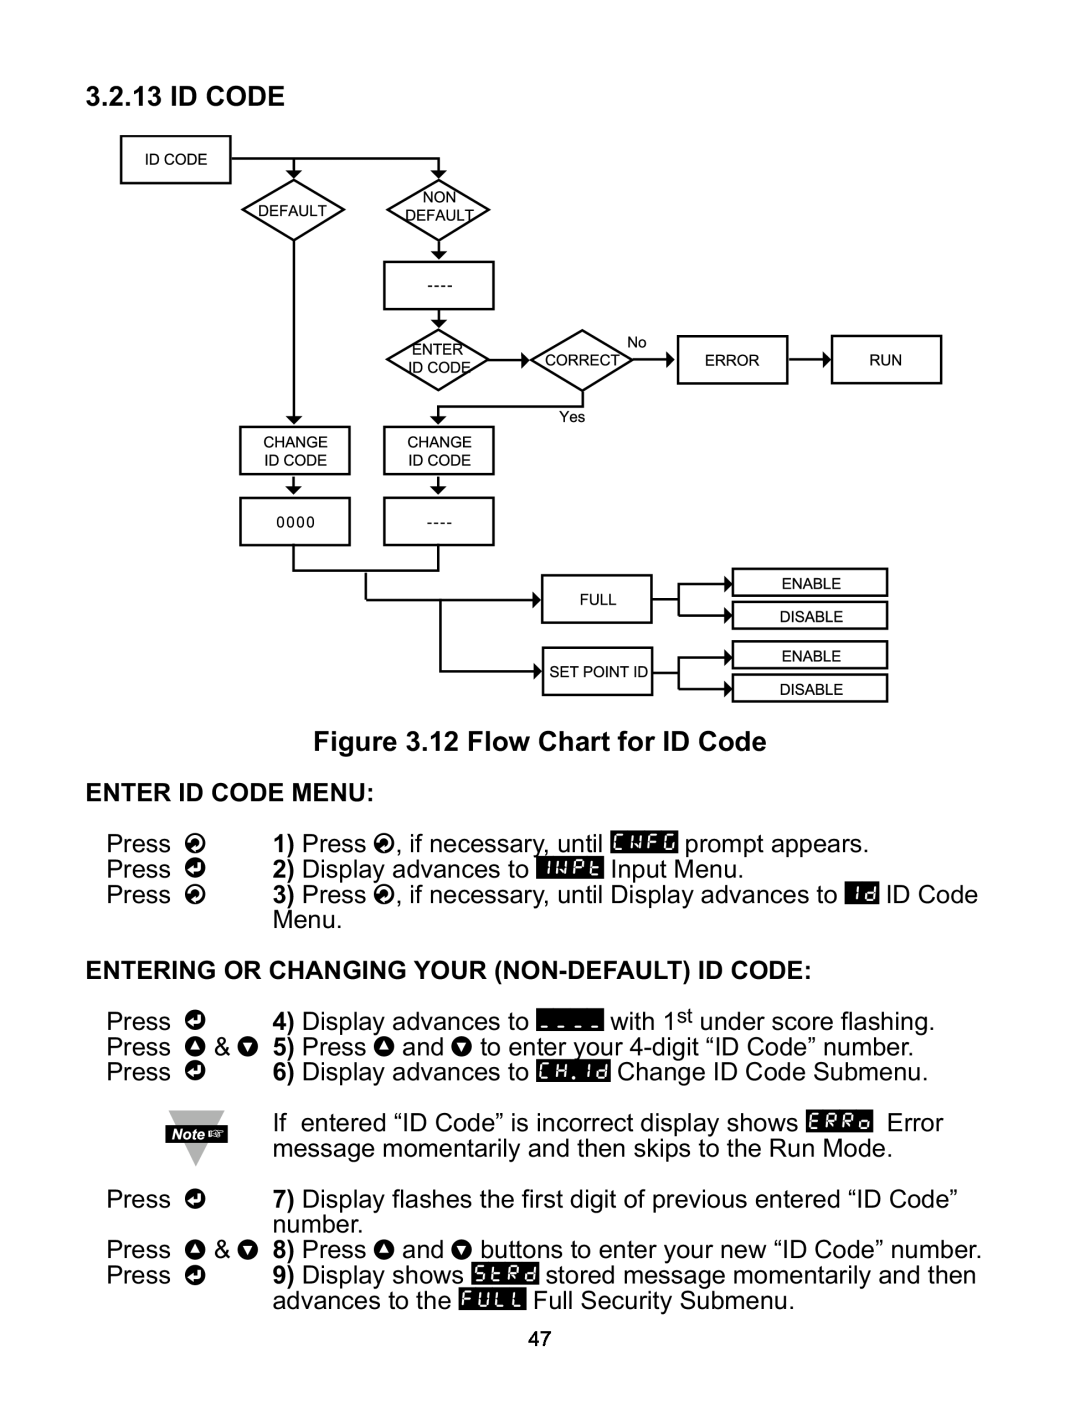 Omega CNI16D, CNI8DV ID CODE .12 Flow Chart for ID Code, Enter Id Code Menu, Entering Or Changing Your Non-Default Id Code 